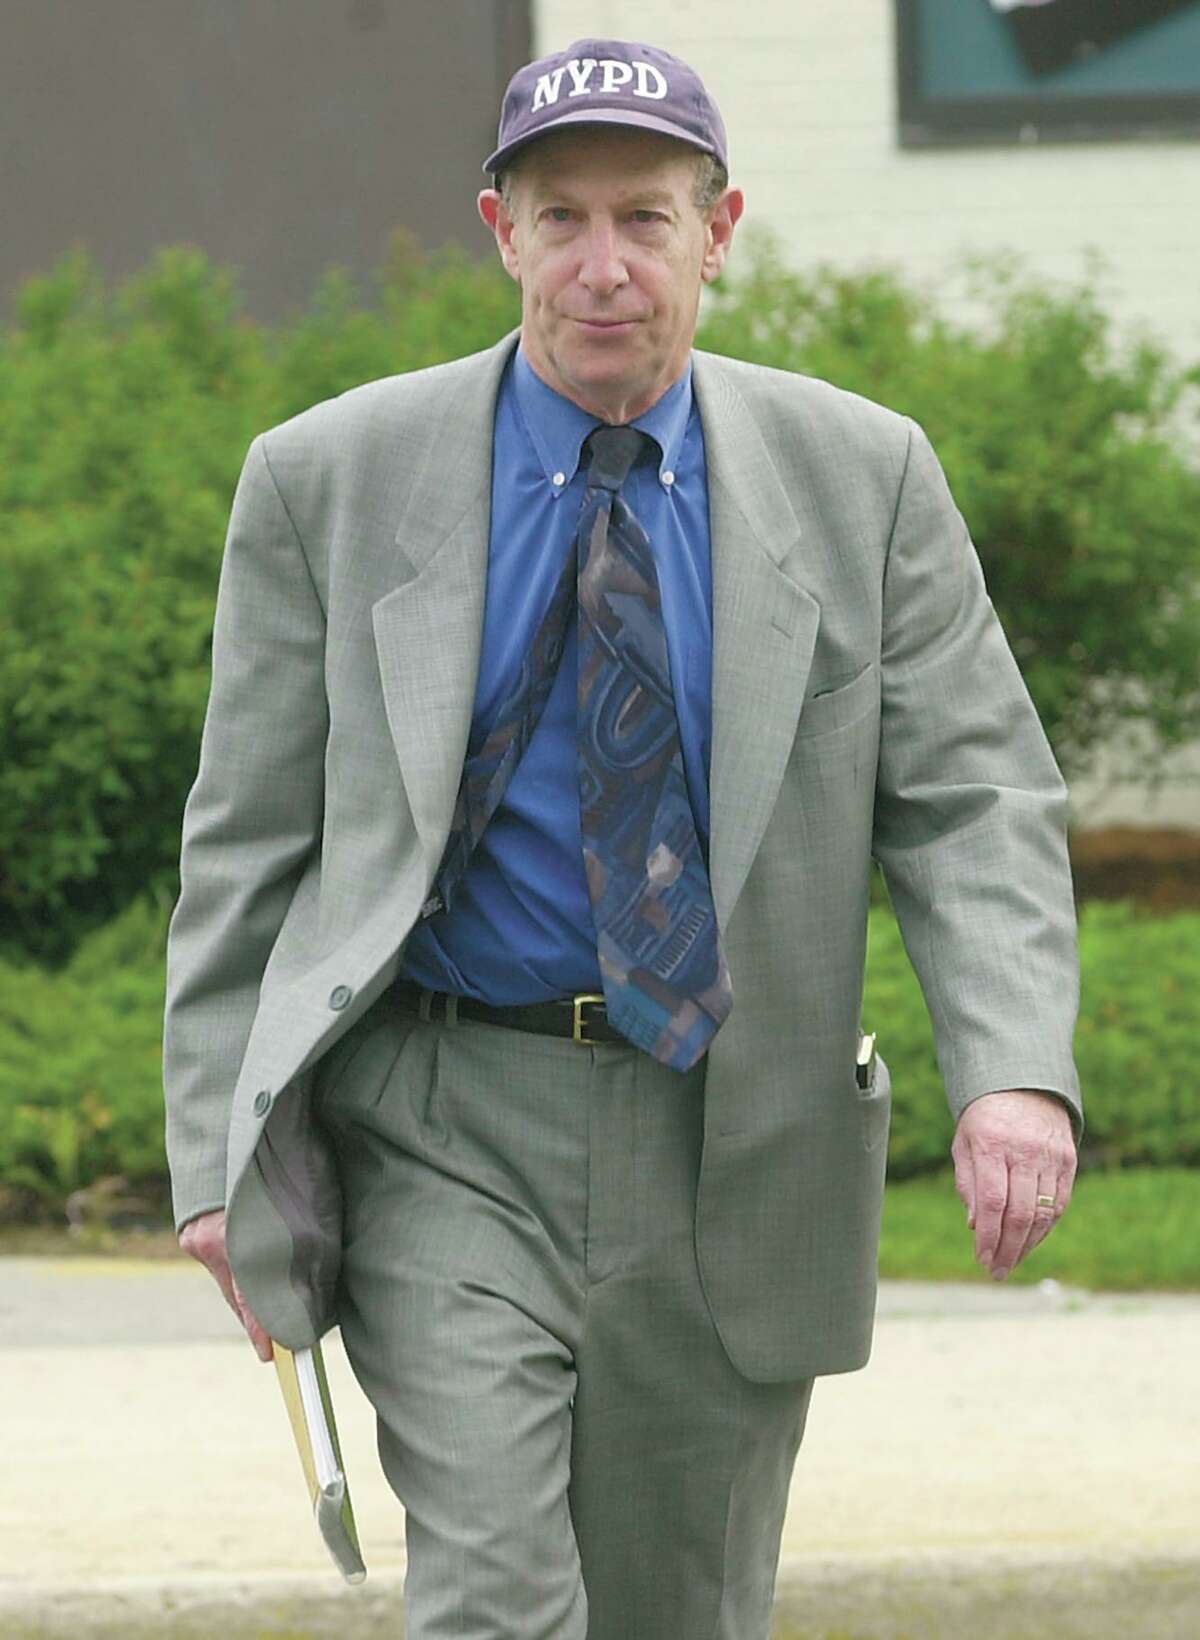 Len Levitt on his way to the Norwalk courthouse for the Skakel Trial in 2002. Levitt died at age 79 in his Stamford, Conn., home in May 18, 2020.